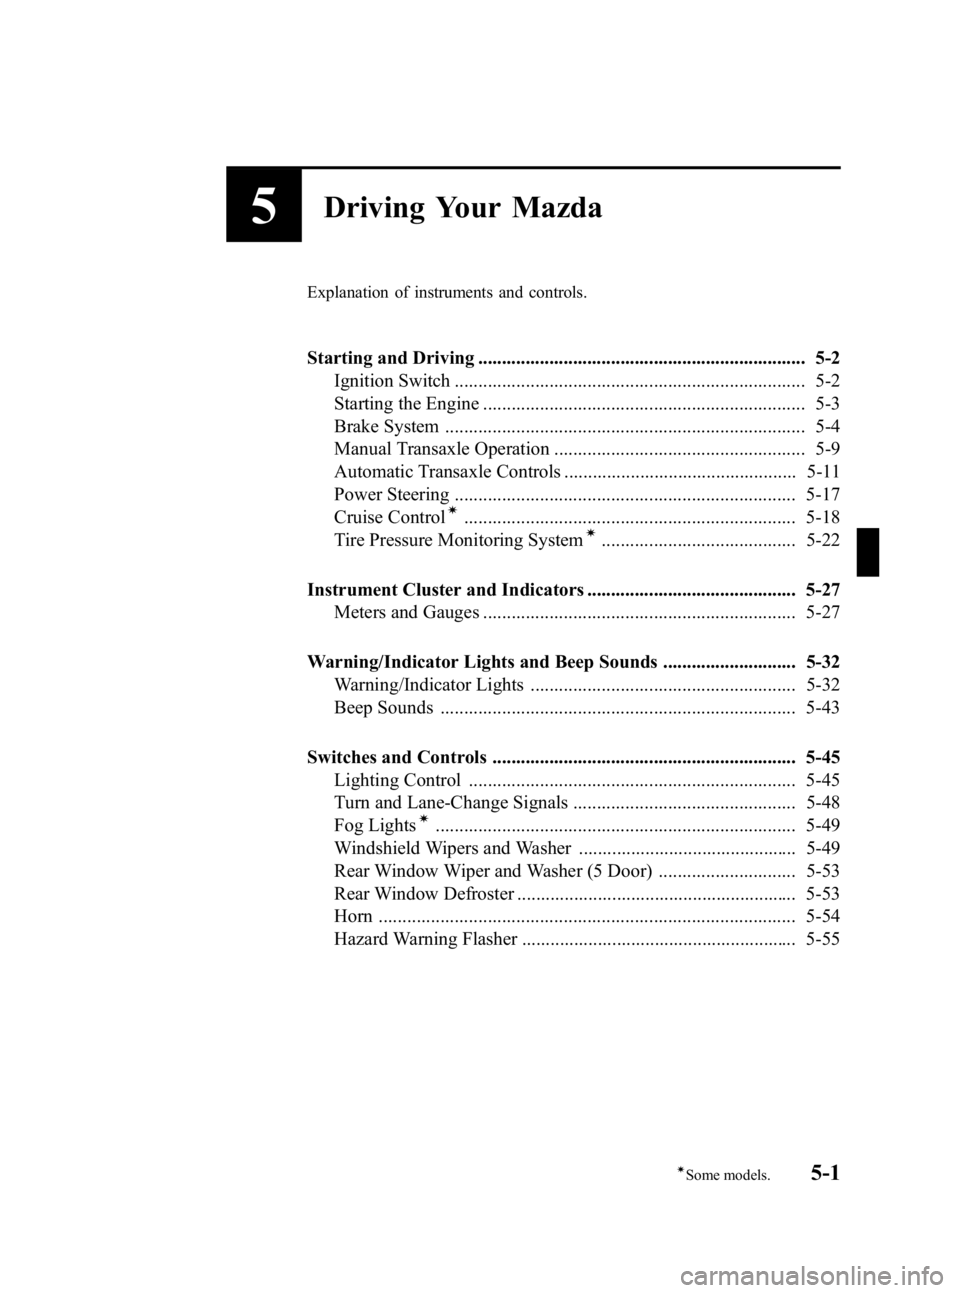 MAZDA MODEL 3 4-DOOR 2005  Owners Manual Black plate (115,1)
5Driving Your Mazda
Explanation of instruments and controls.
Starting and Driving ..................................................................... 5-2Ignition Switch .........